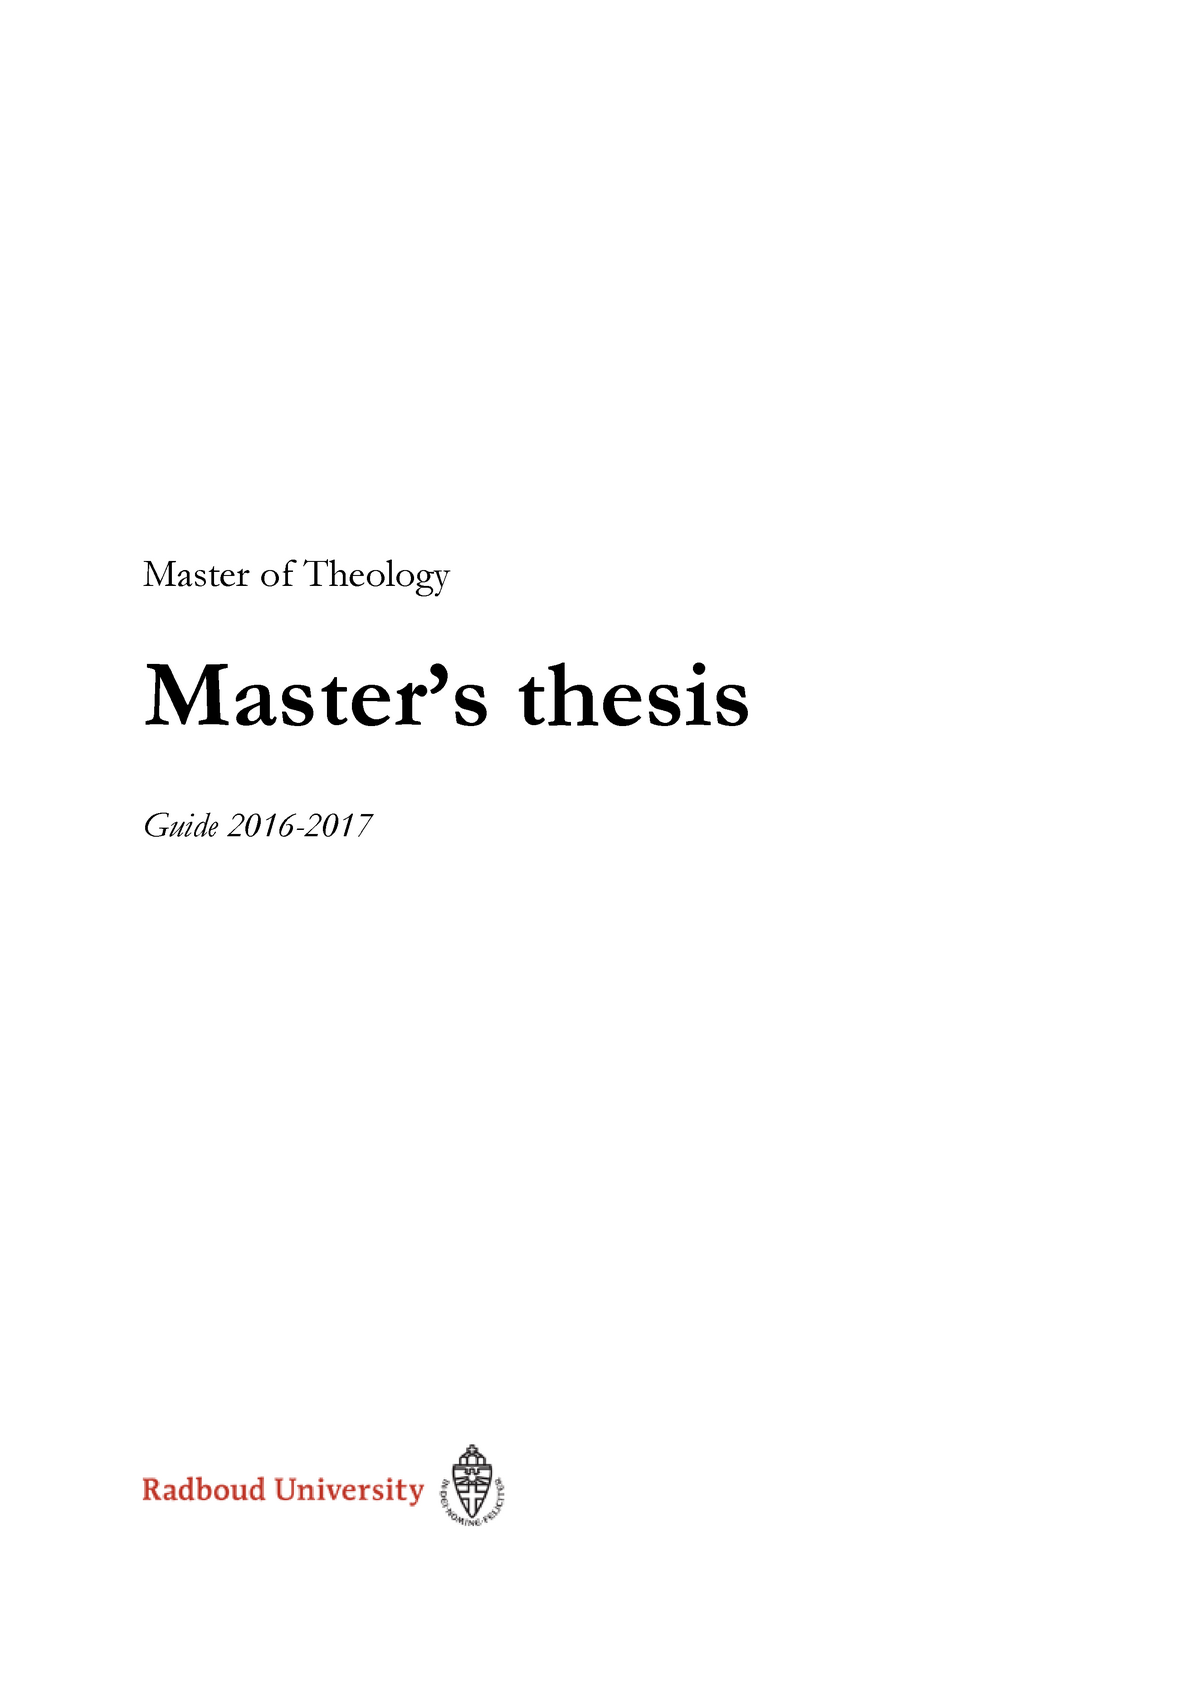 ma thesis title